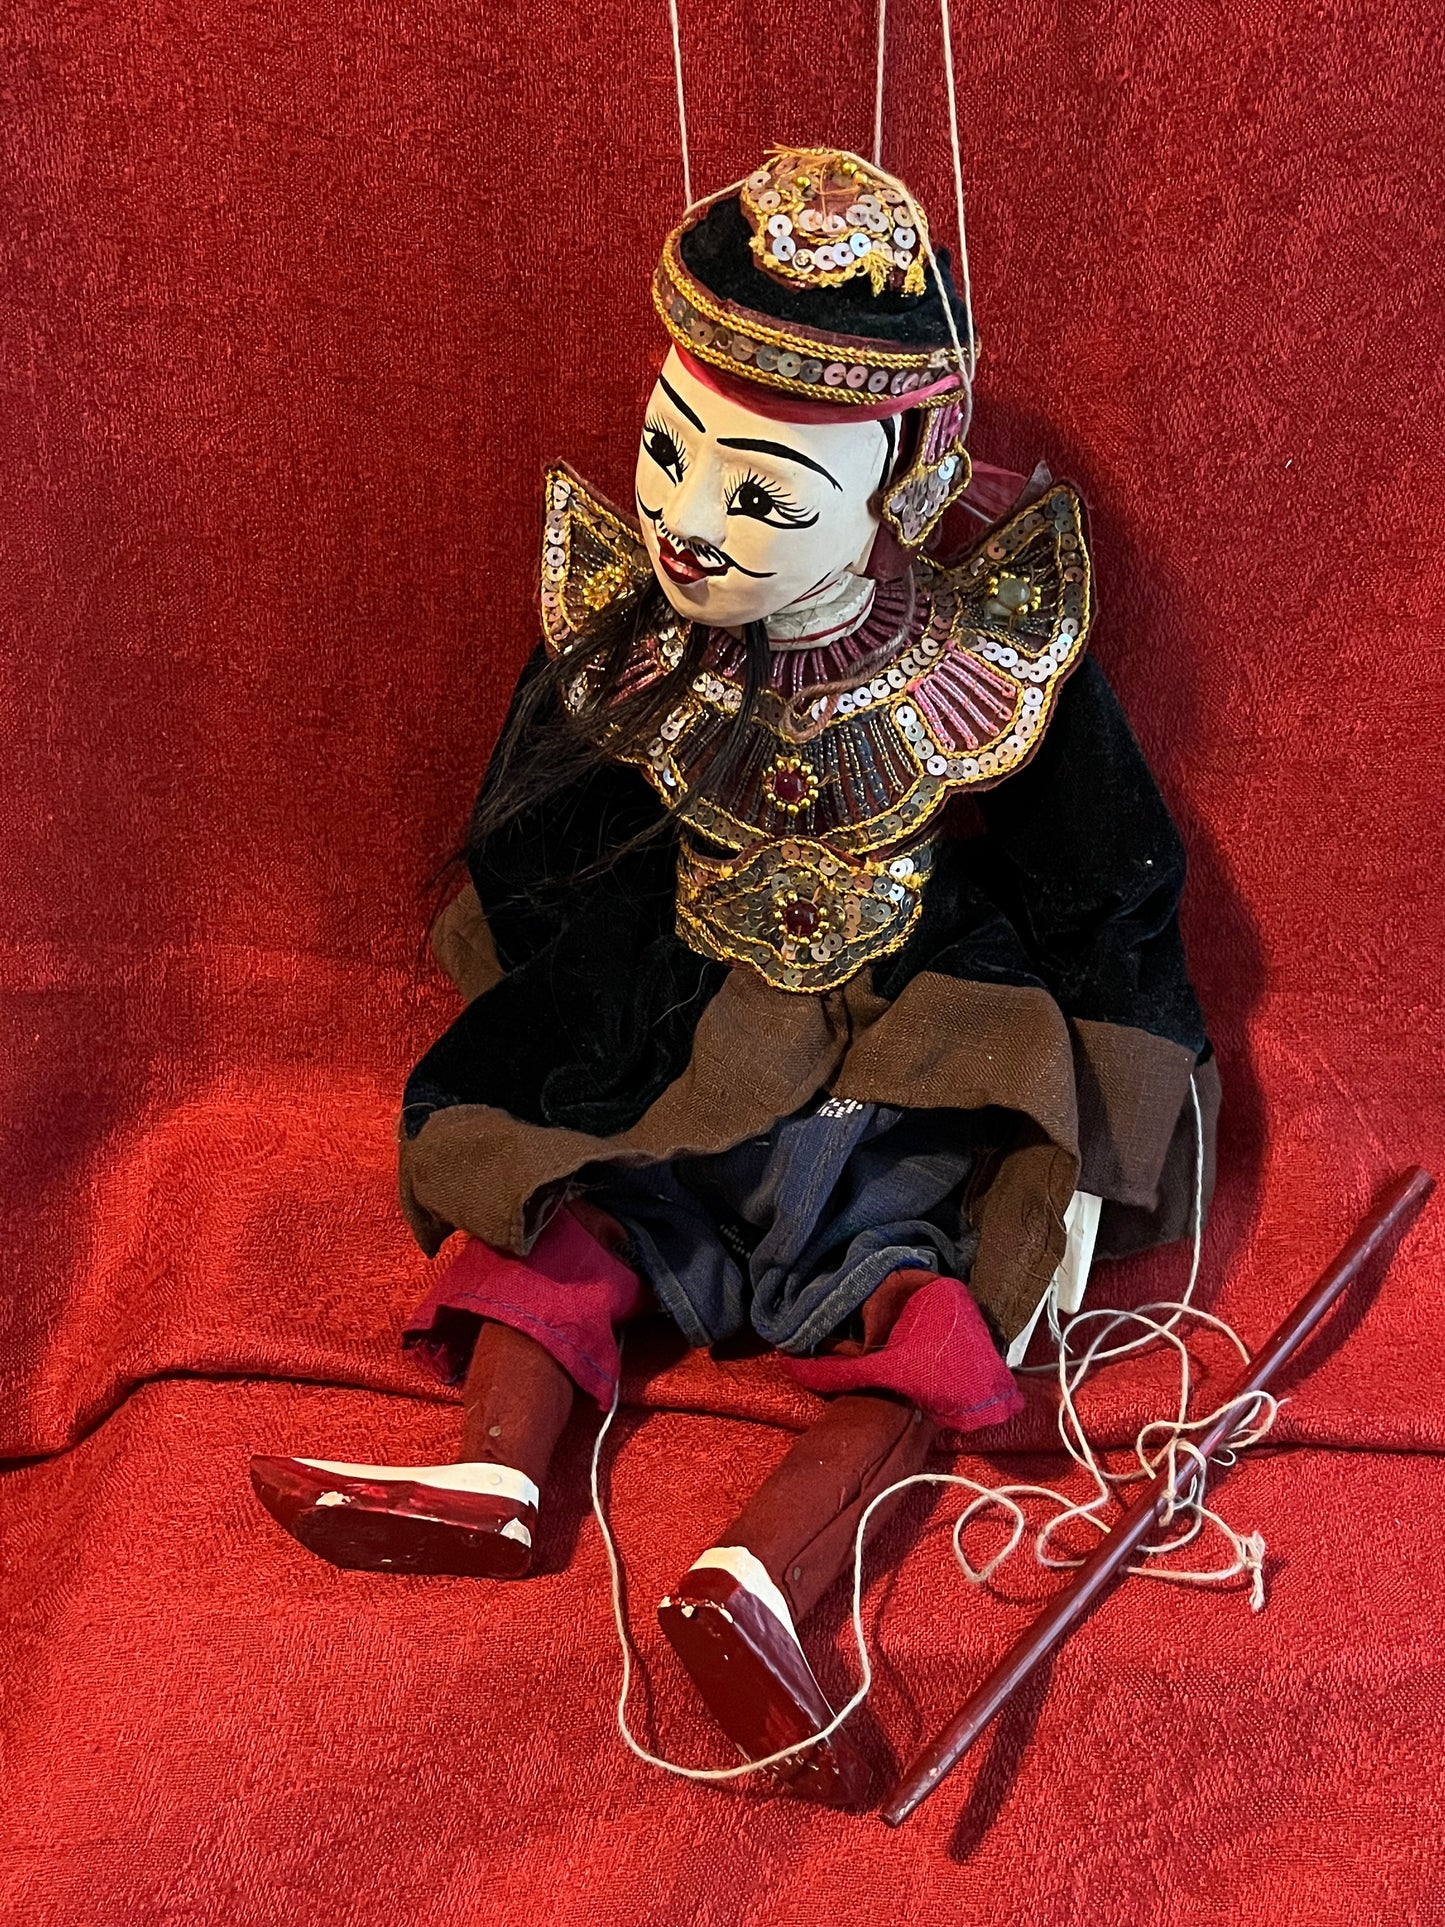 Asian Male Marionette